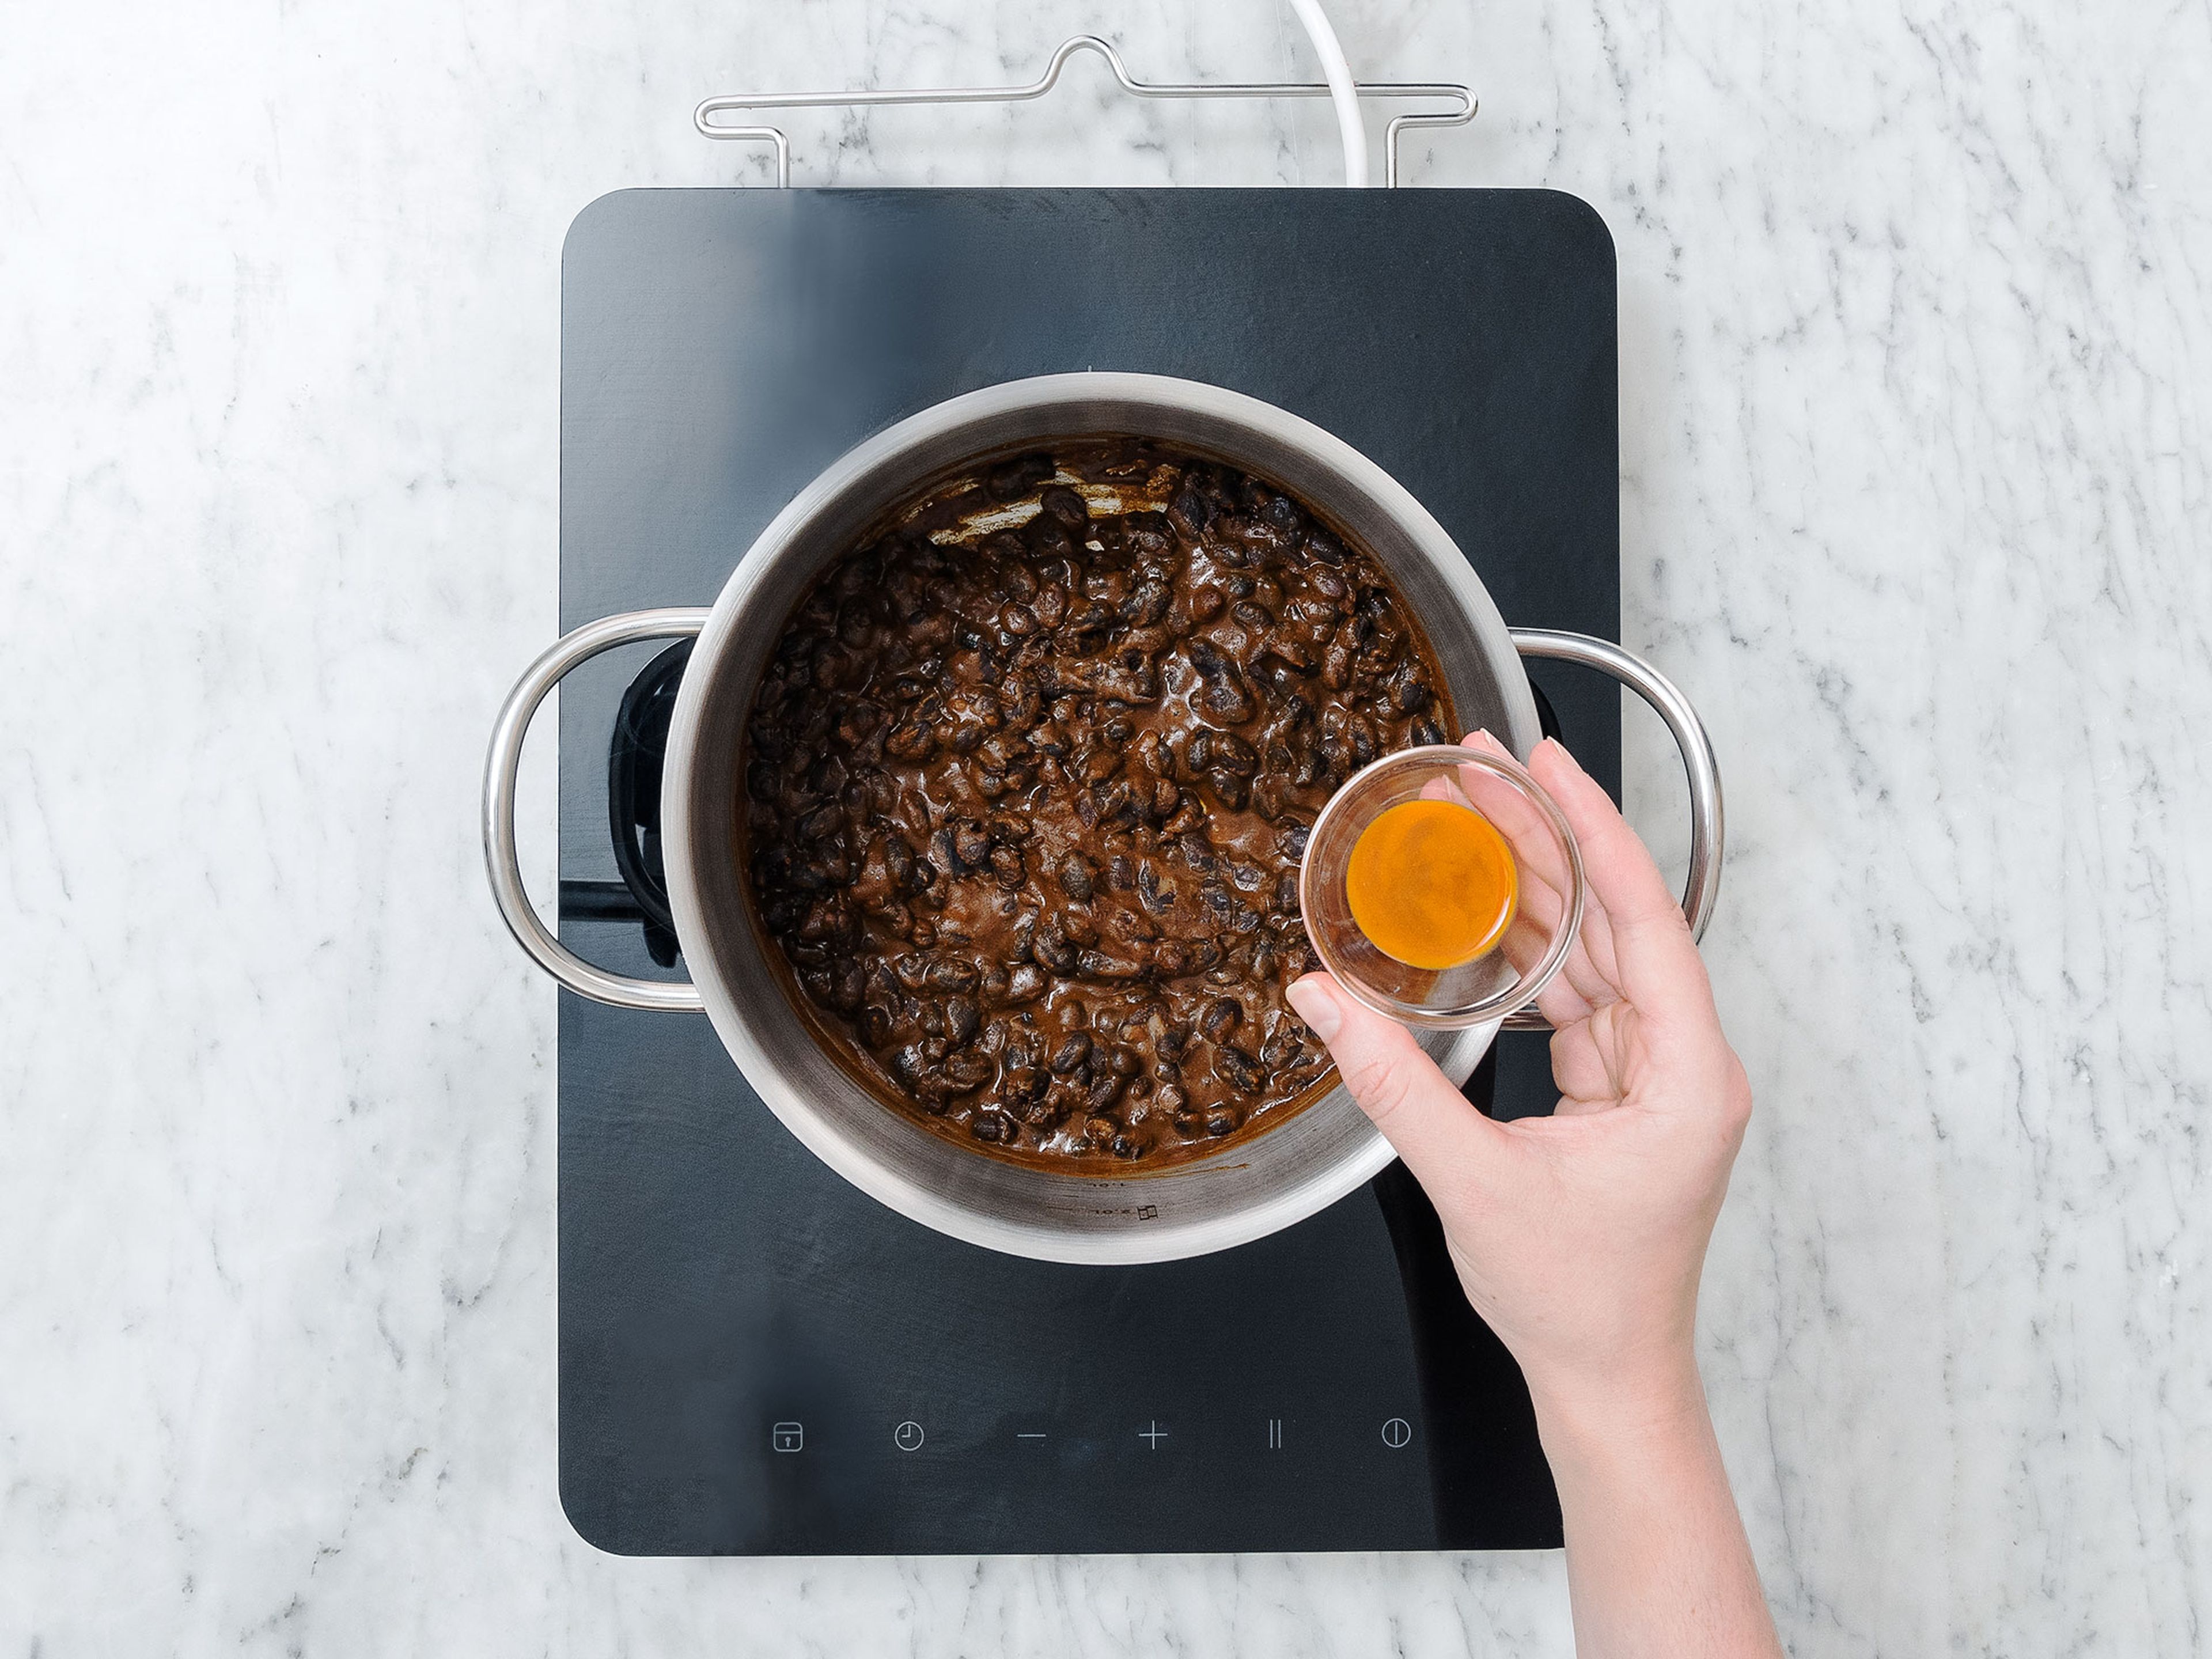 Drain water from can of black beans and rinse beans under clear water. Add black beans, mole sauce and salsa picante to a small saucepan. Stir to combine and heat up for approx. 4 – 5 min. Remove from heat.